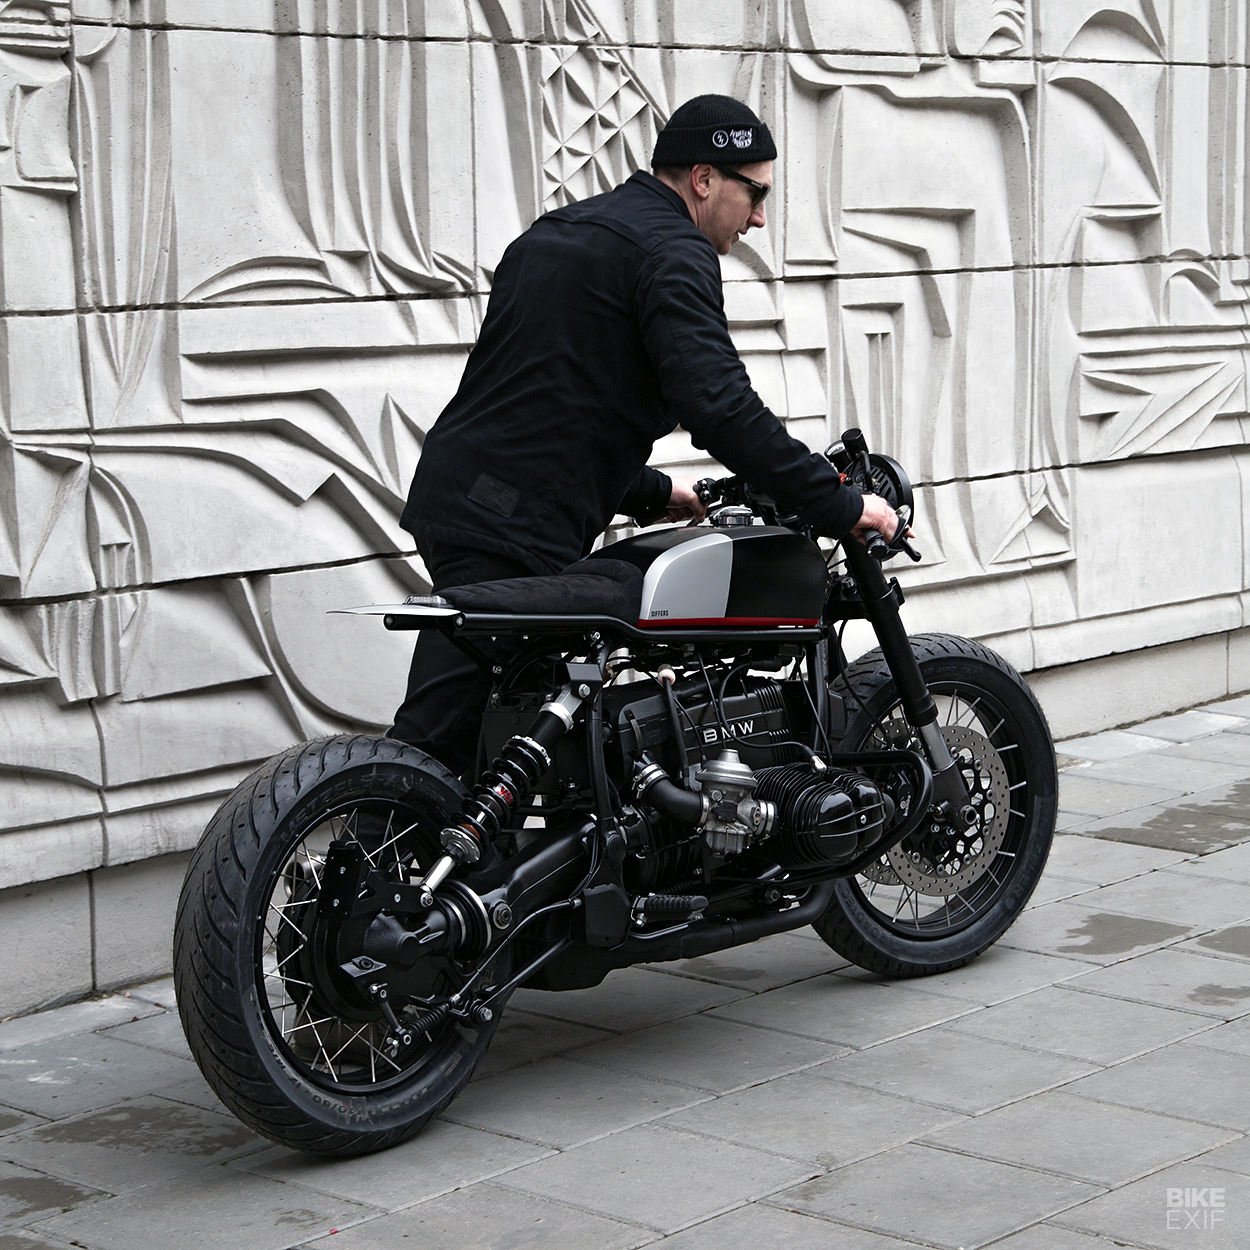 Boxer Magic: A BMW airhead cafe racer from Lithuania